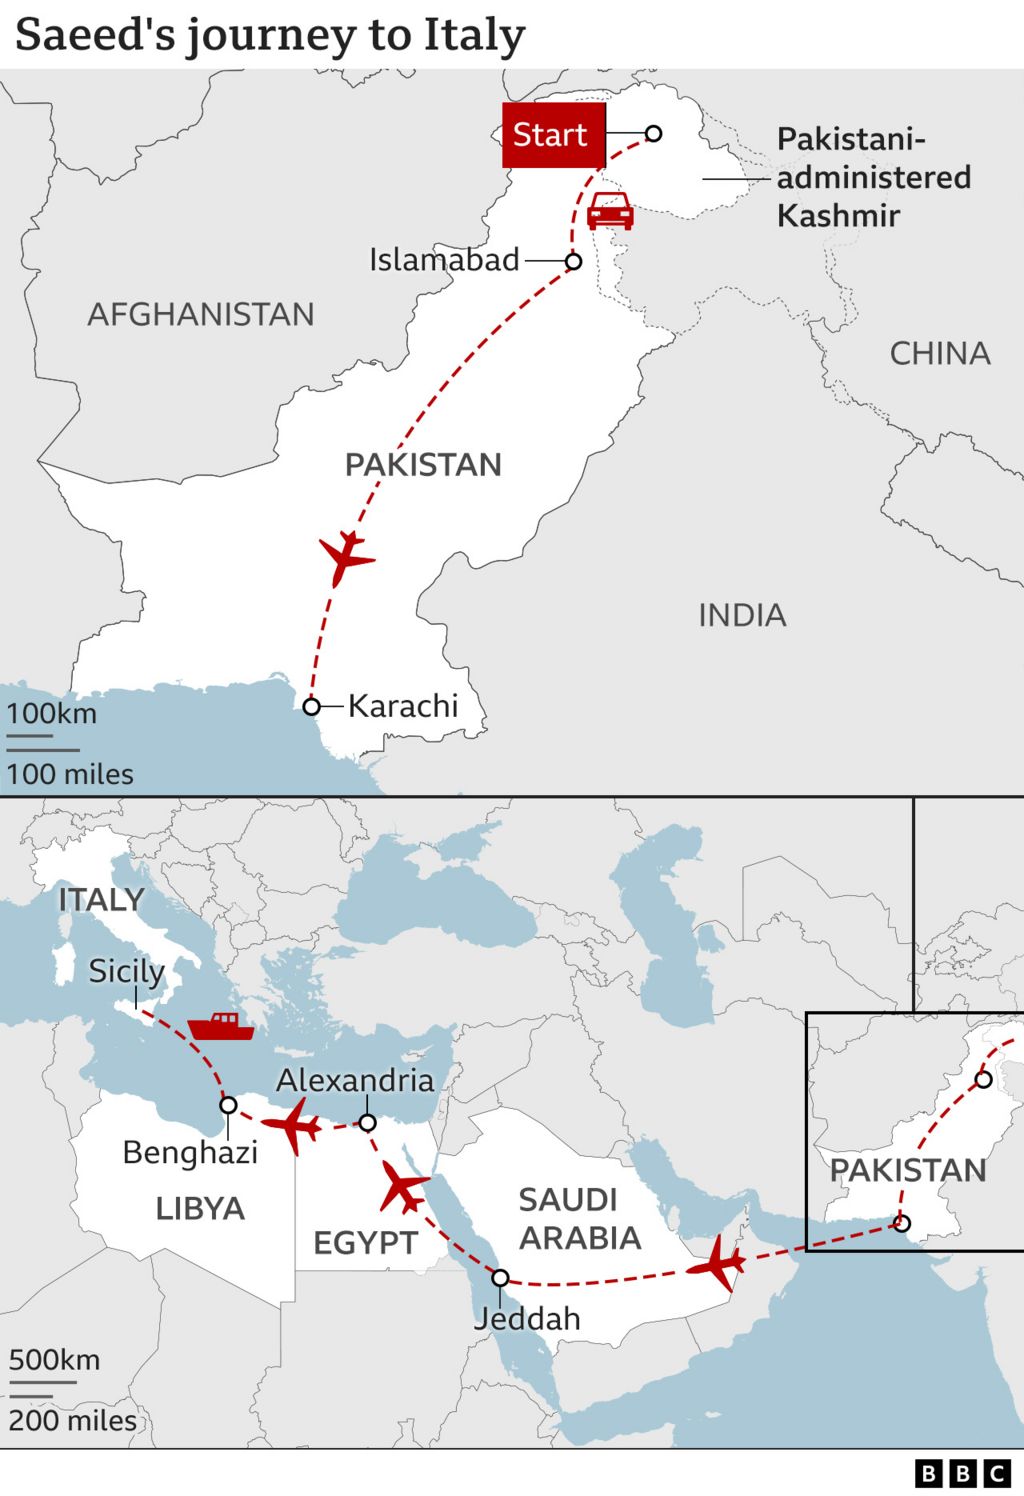 Graphic showing Saeed's route to Turkey